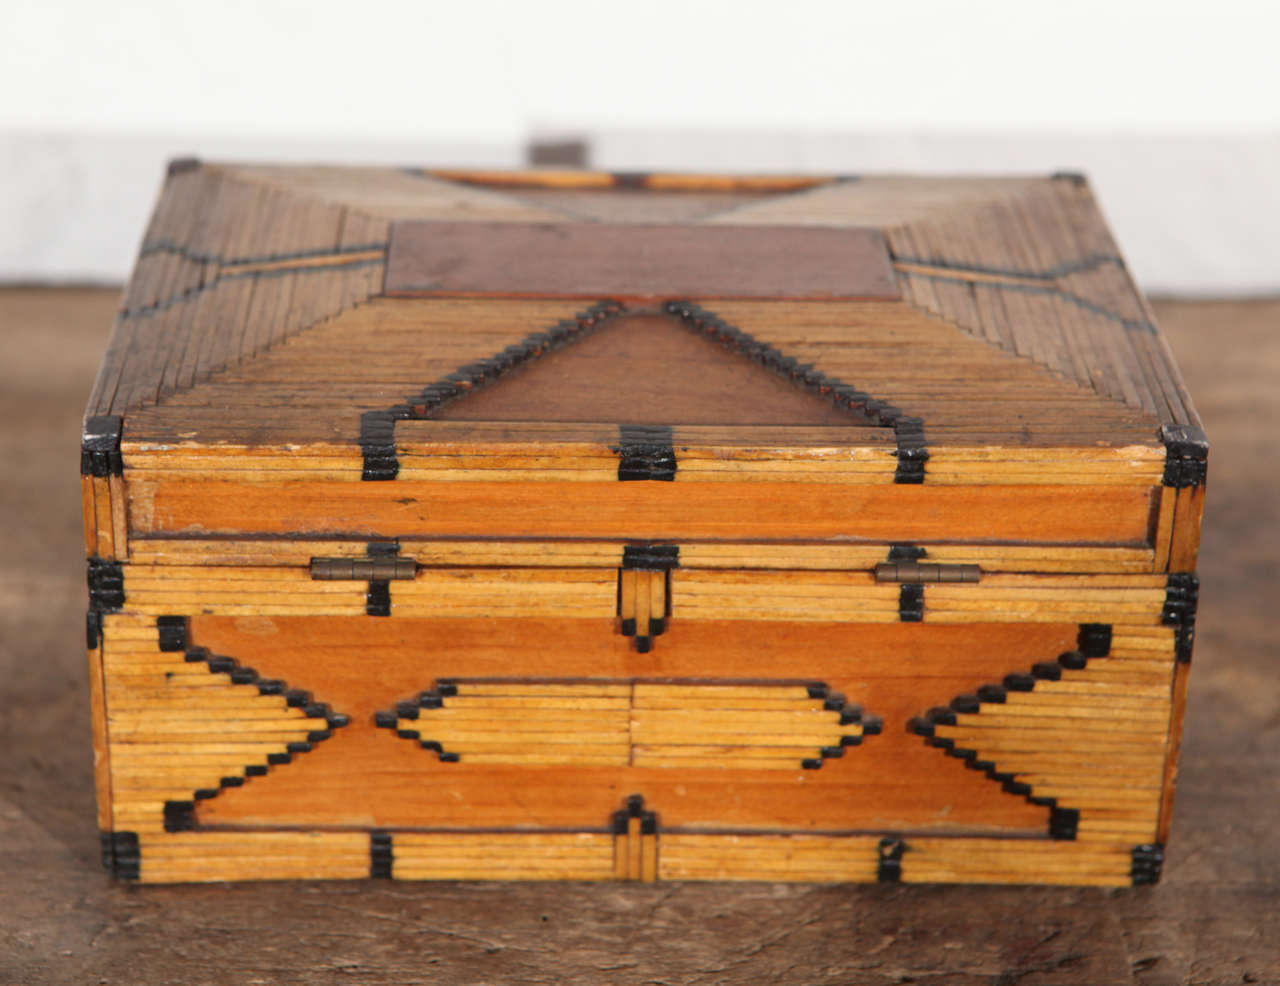 This unique decorative Folk Art box is a great piece of matchstick art. The burnt edged wooden matchsticks have been carefully inlaid with wooden pieces into geometric patterns that are especially handsome and striking with the contrast of the burnt